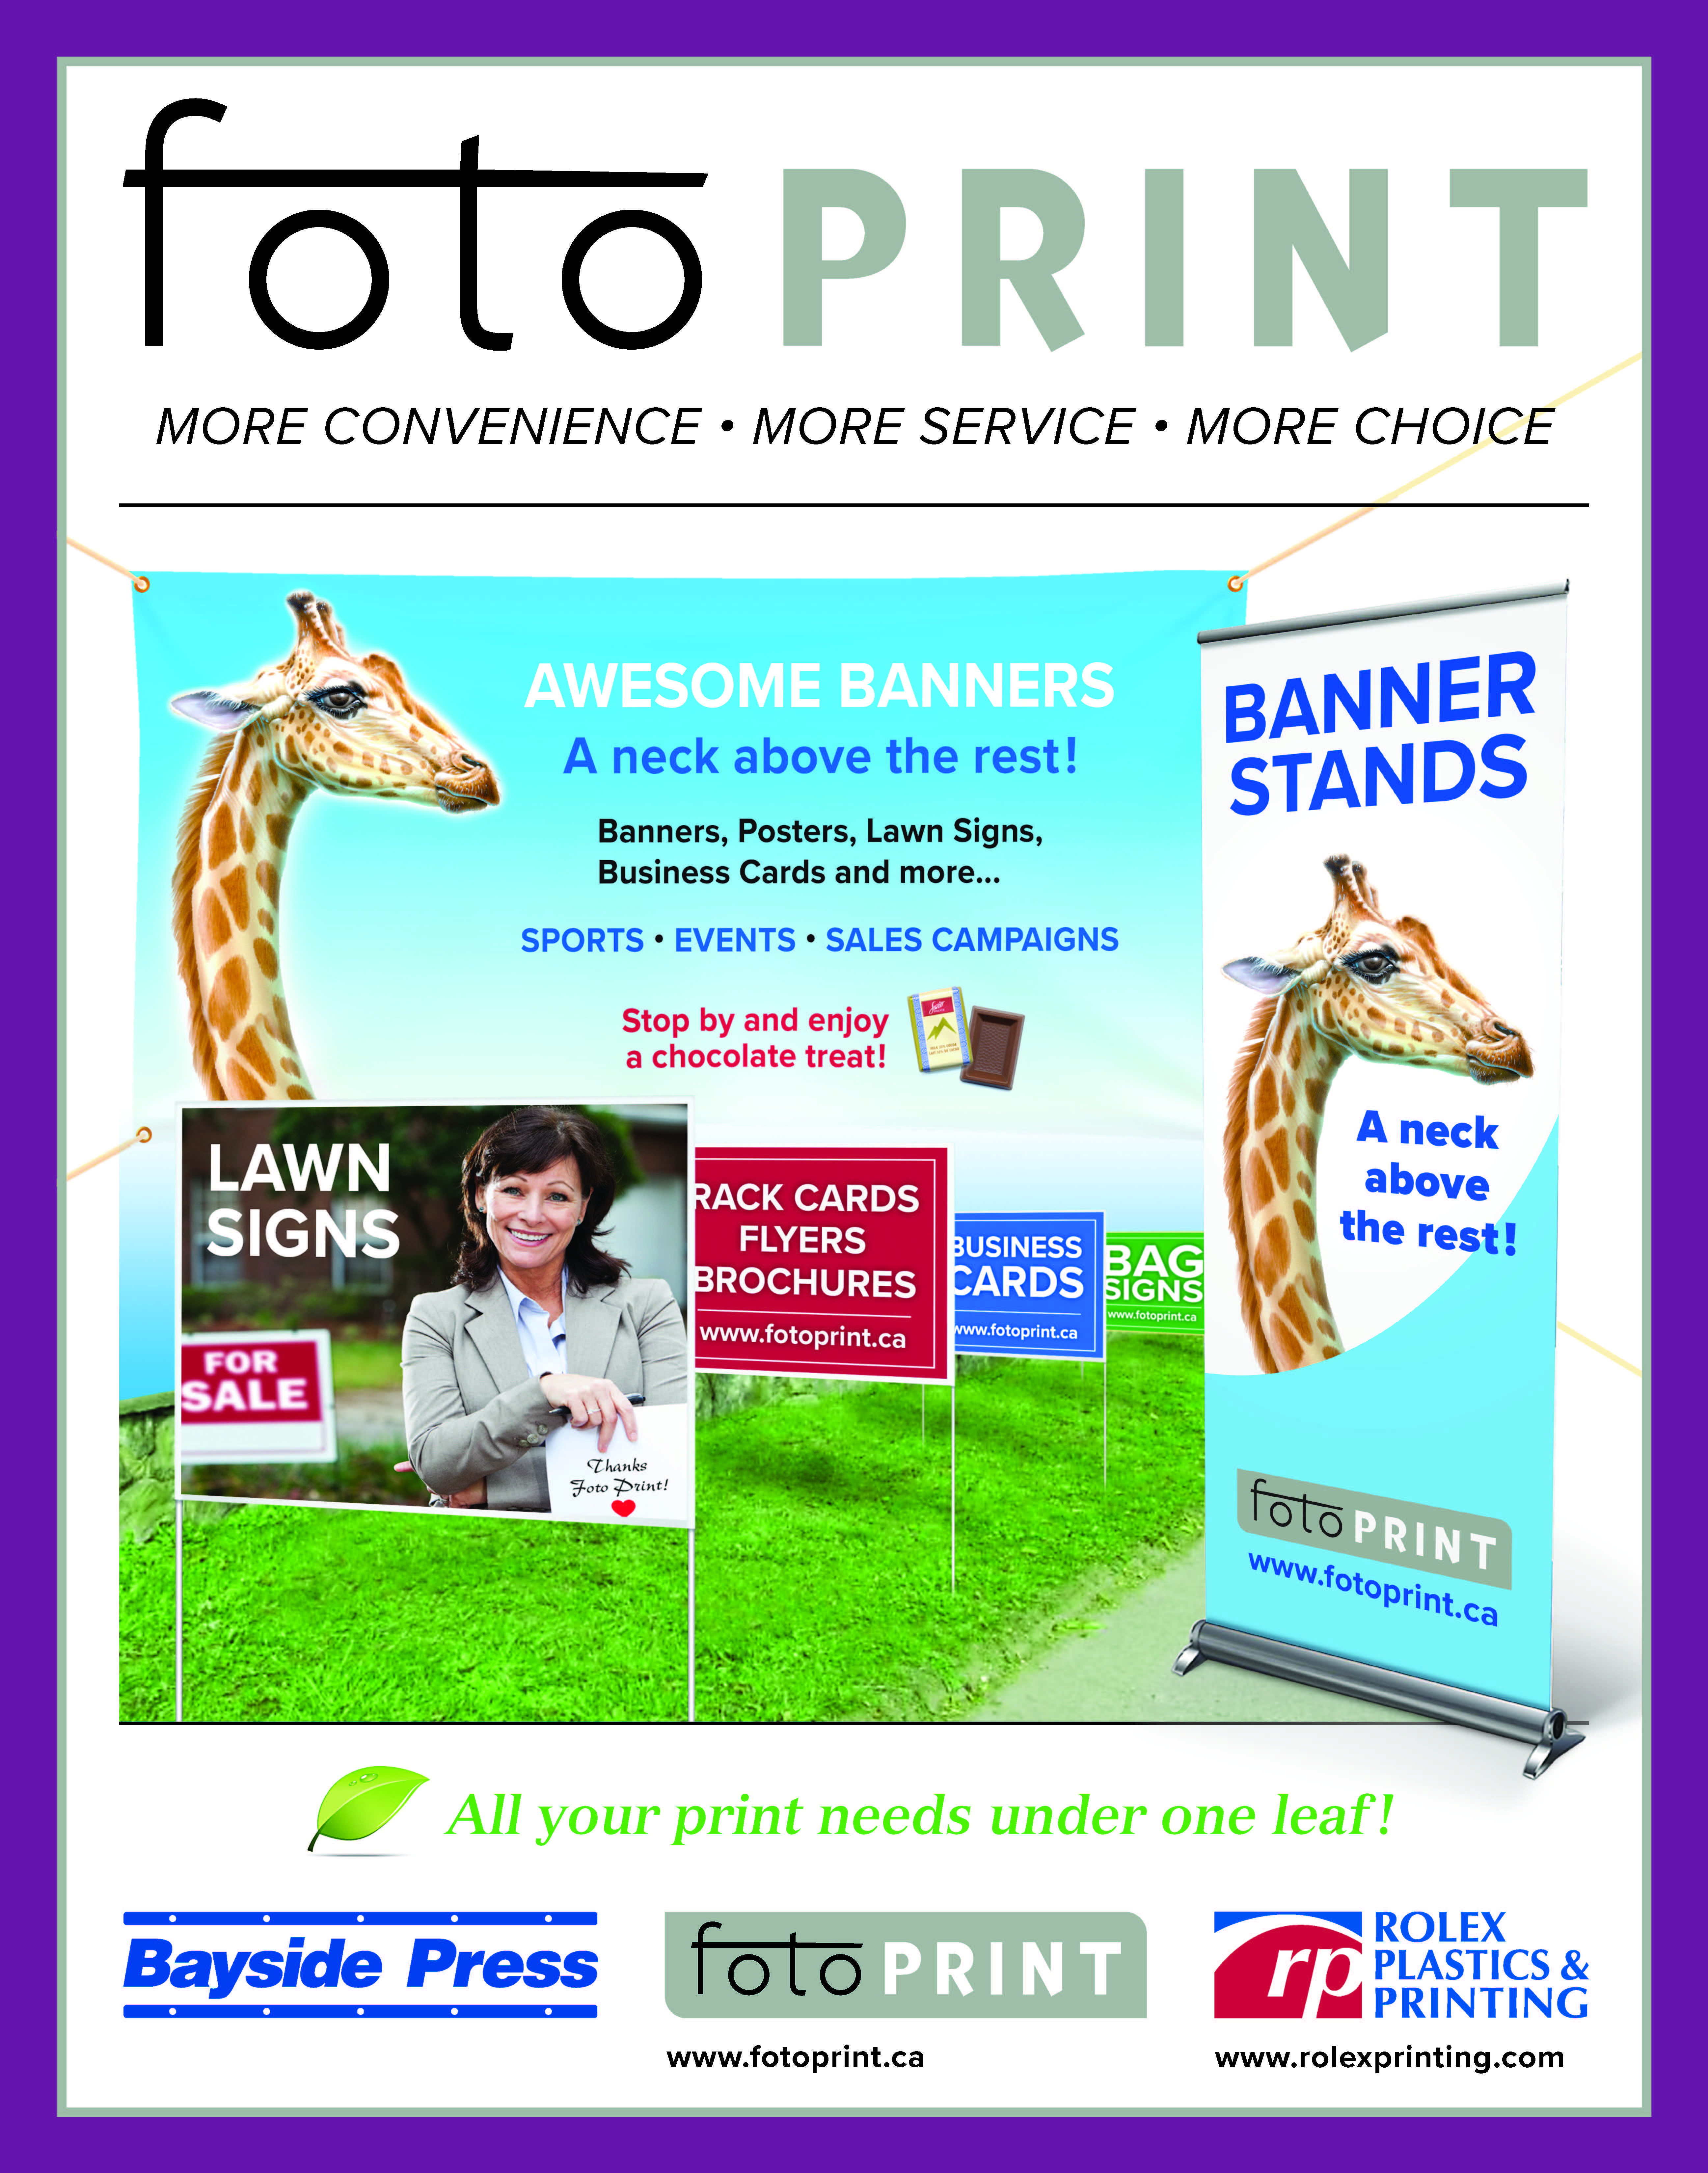 Interessant of Supplement Posters - FOTO PRINT - Your Vision in Print